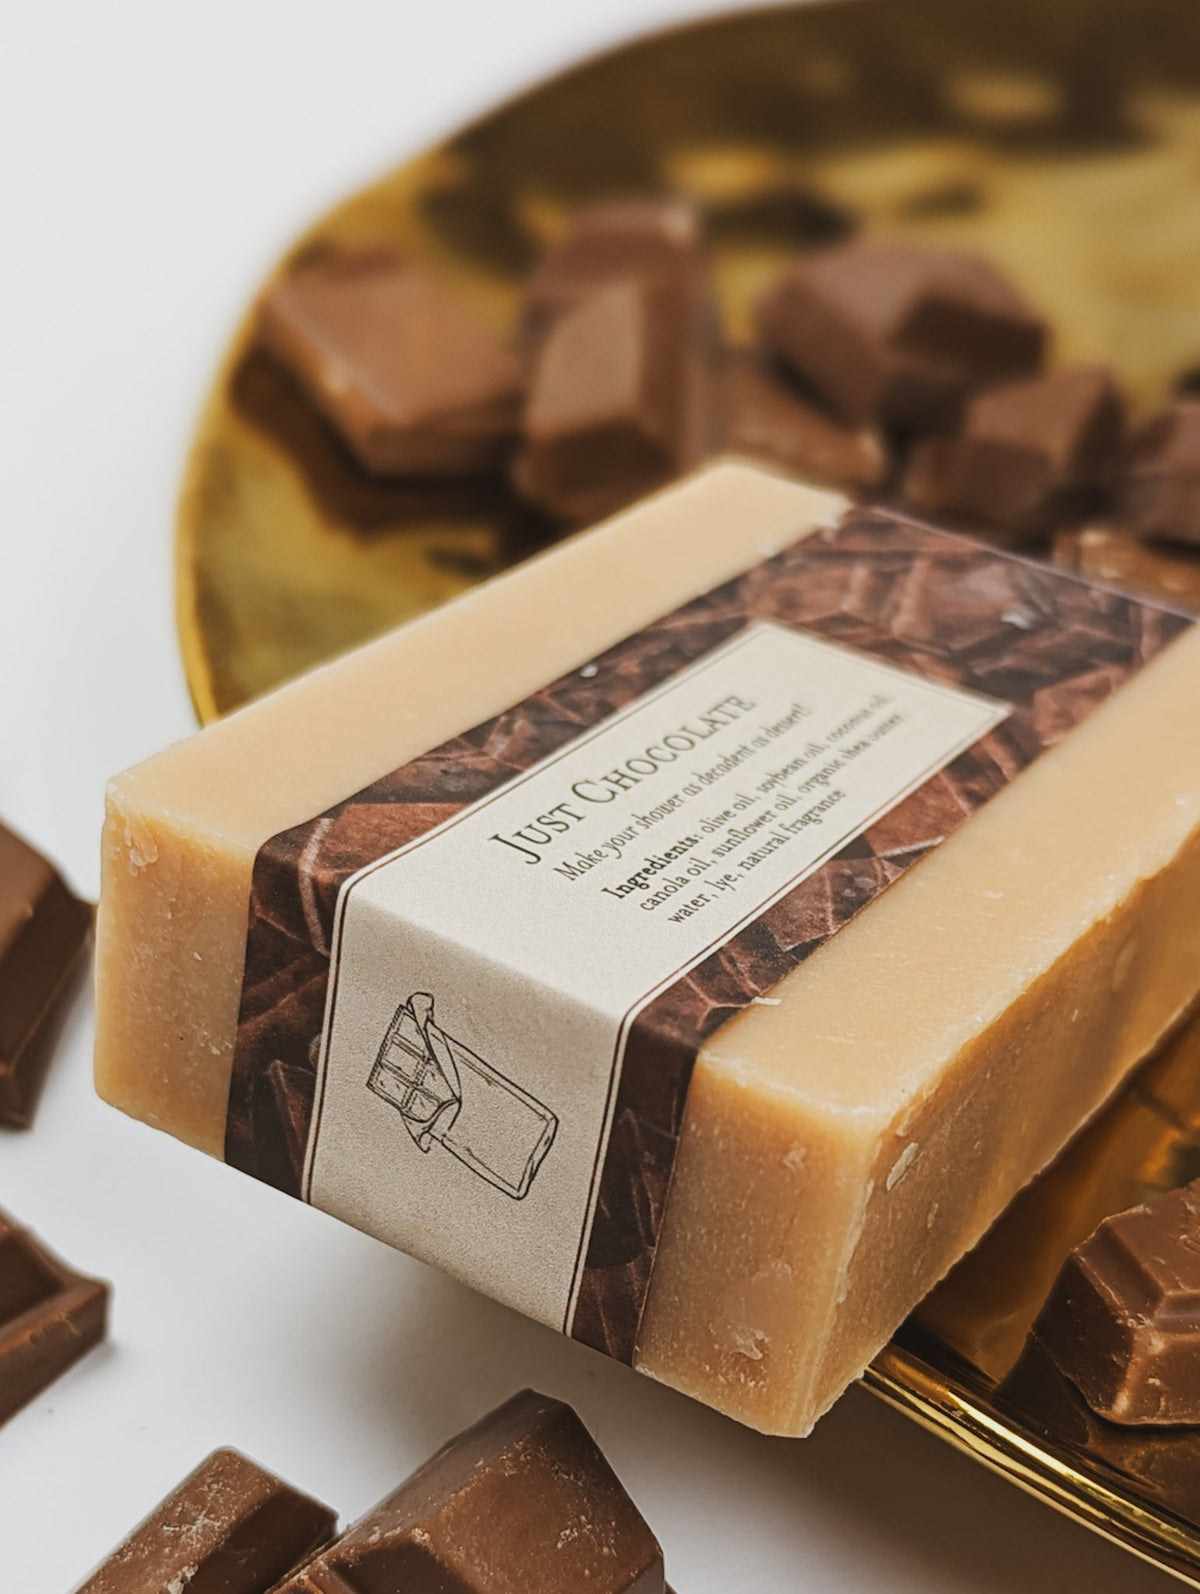 Just Chocolate Soap Bar by Ash & Rose